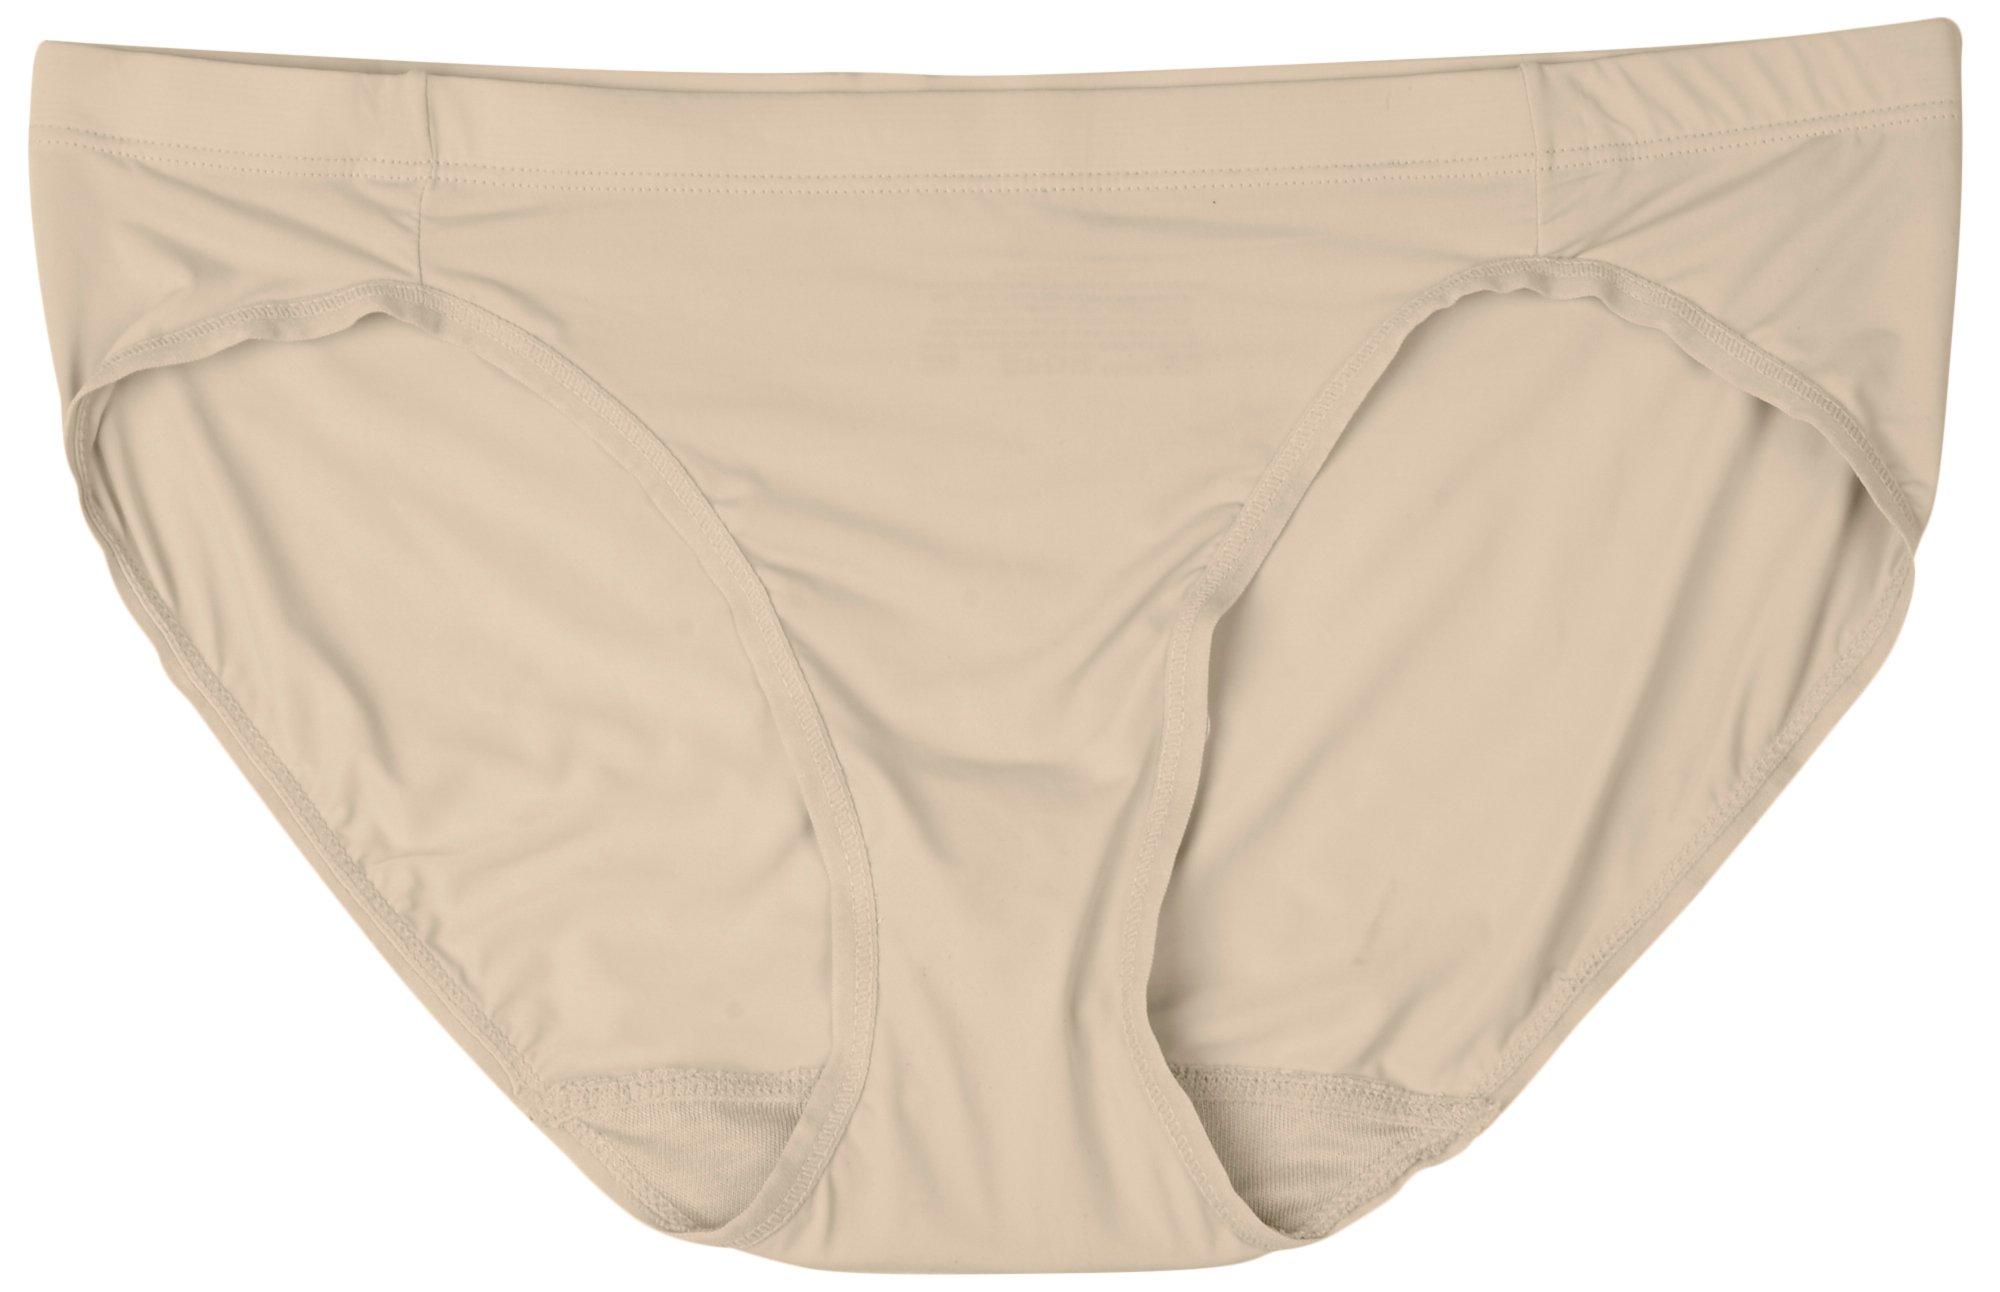 Barely There Beige Panties for Women